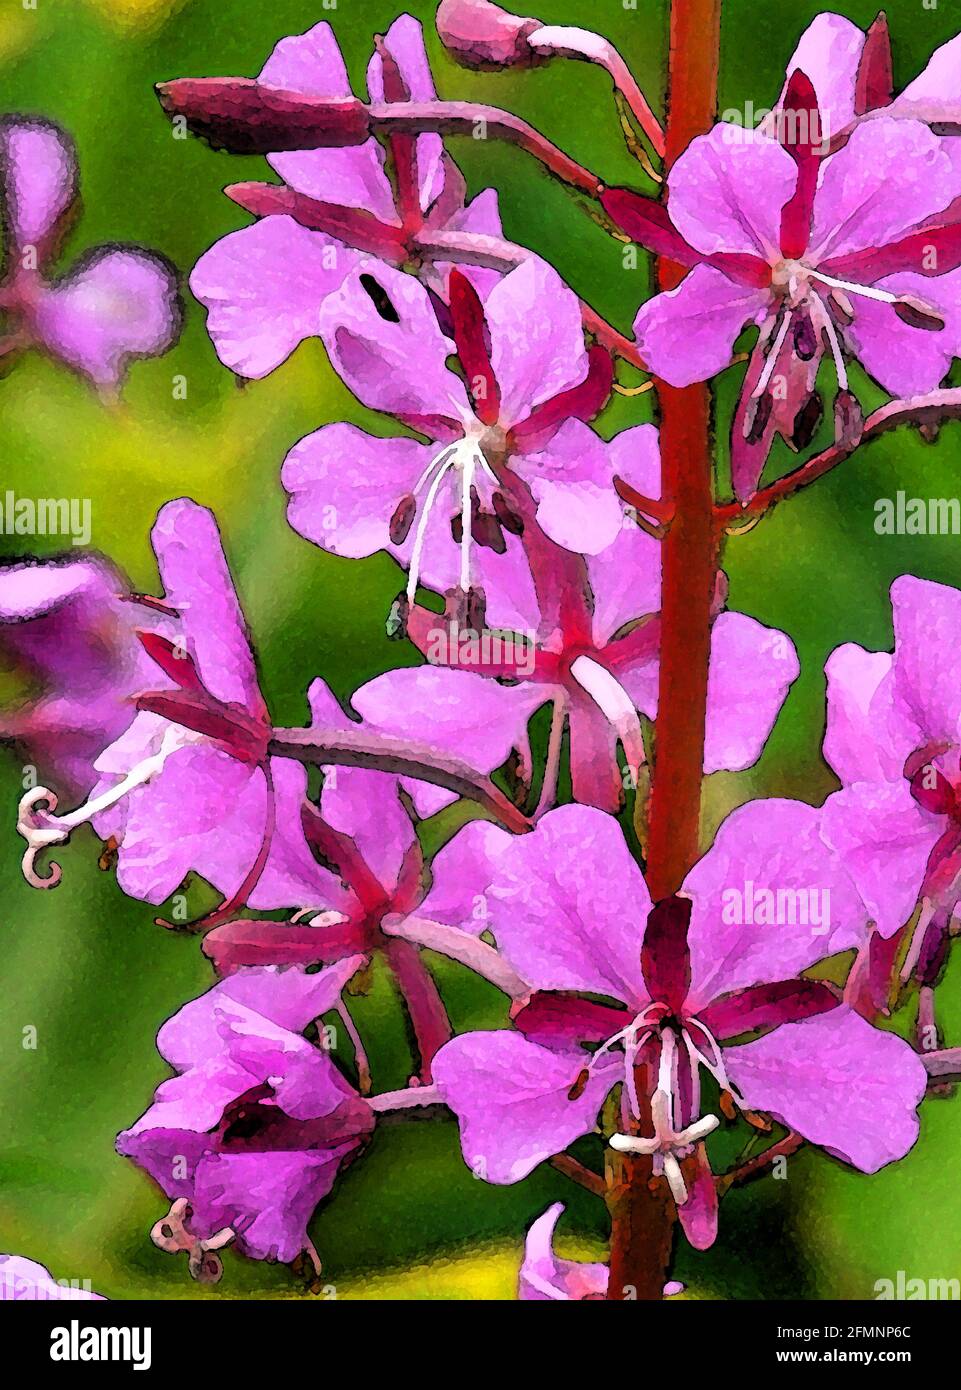 Rose-Bay Willowherb (Epilobium angustifolium) One of Forty-two Iconic Images of English Garden Flowers, Wildflowers and Rural Landscapes. Stock Photo